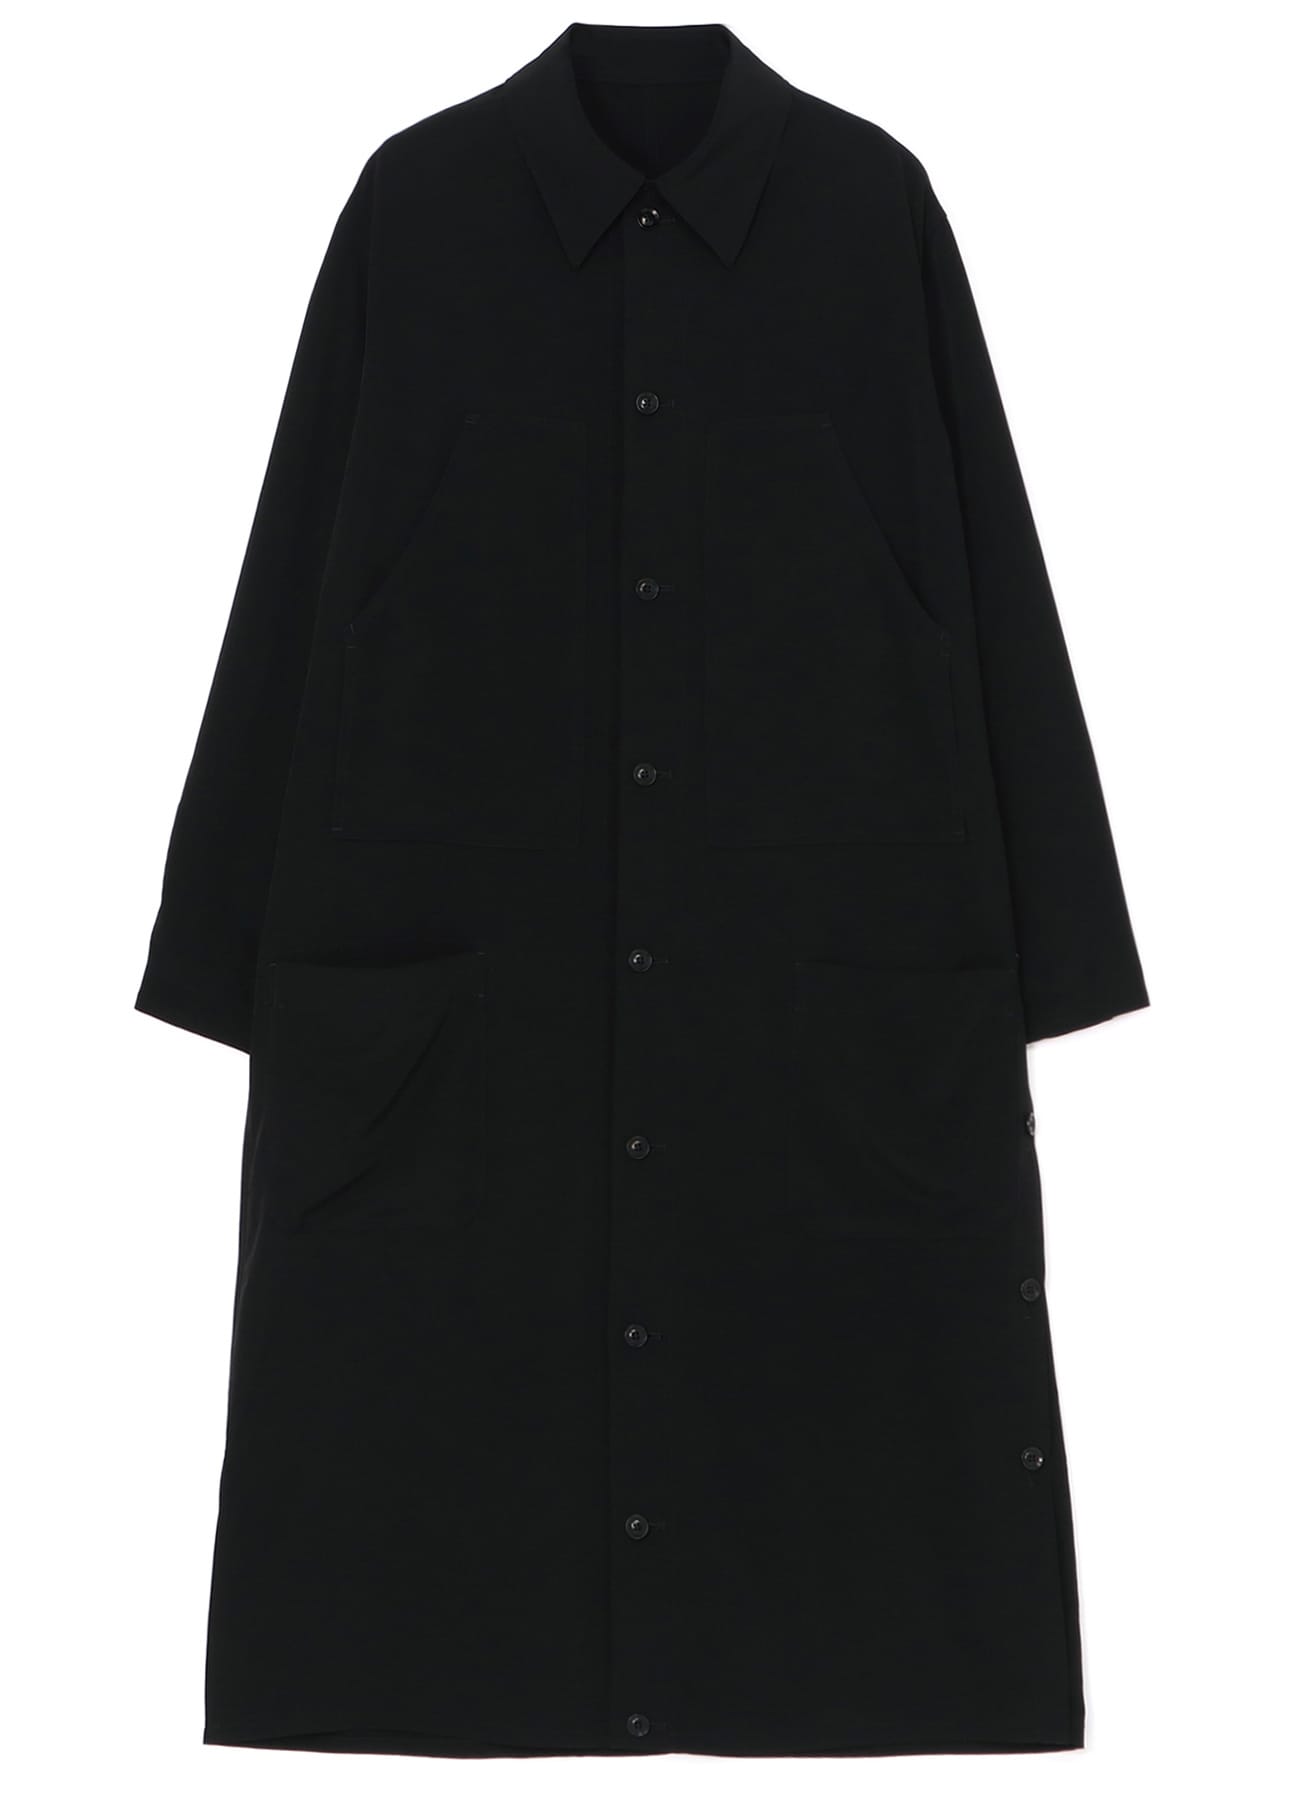 Y's-Black Name]TRIACETATE POLYESTER CREPE de CHINE SIDE VENT WORK 